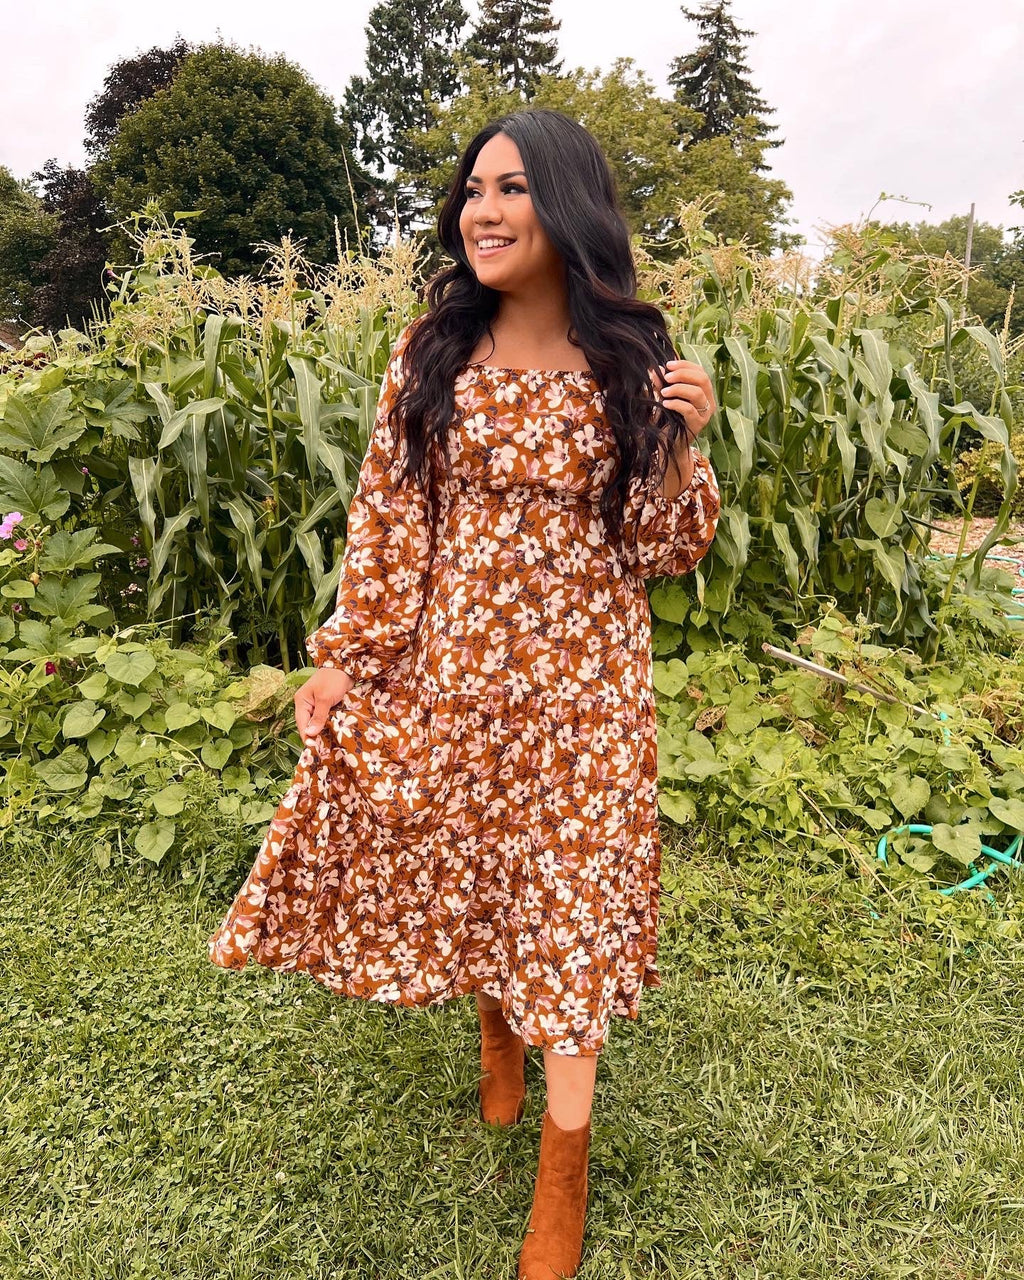 The Falling For You Floral Dress